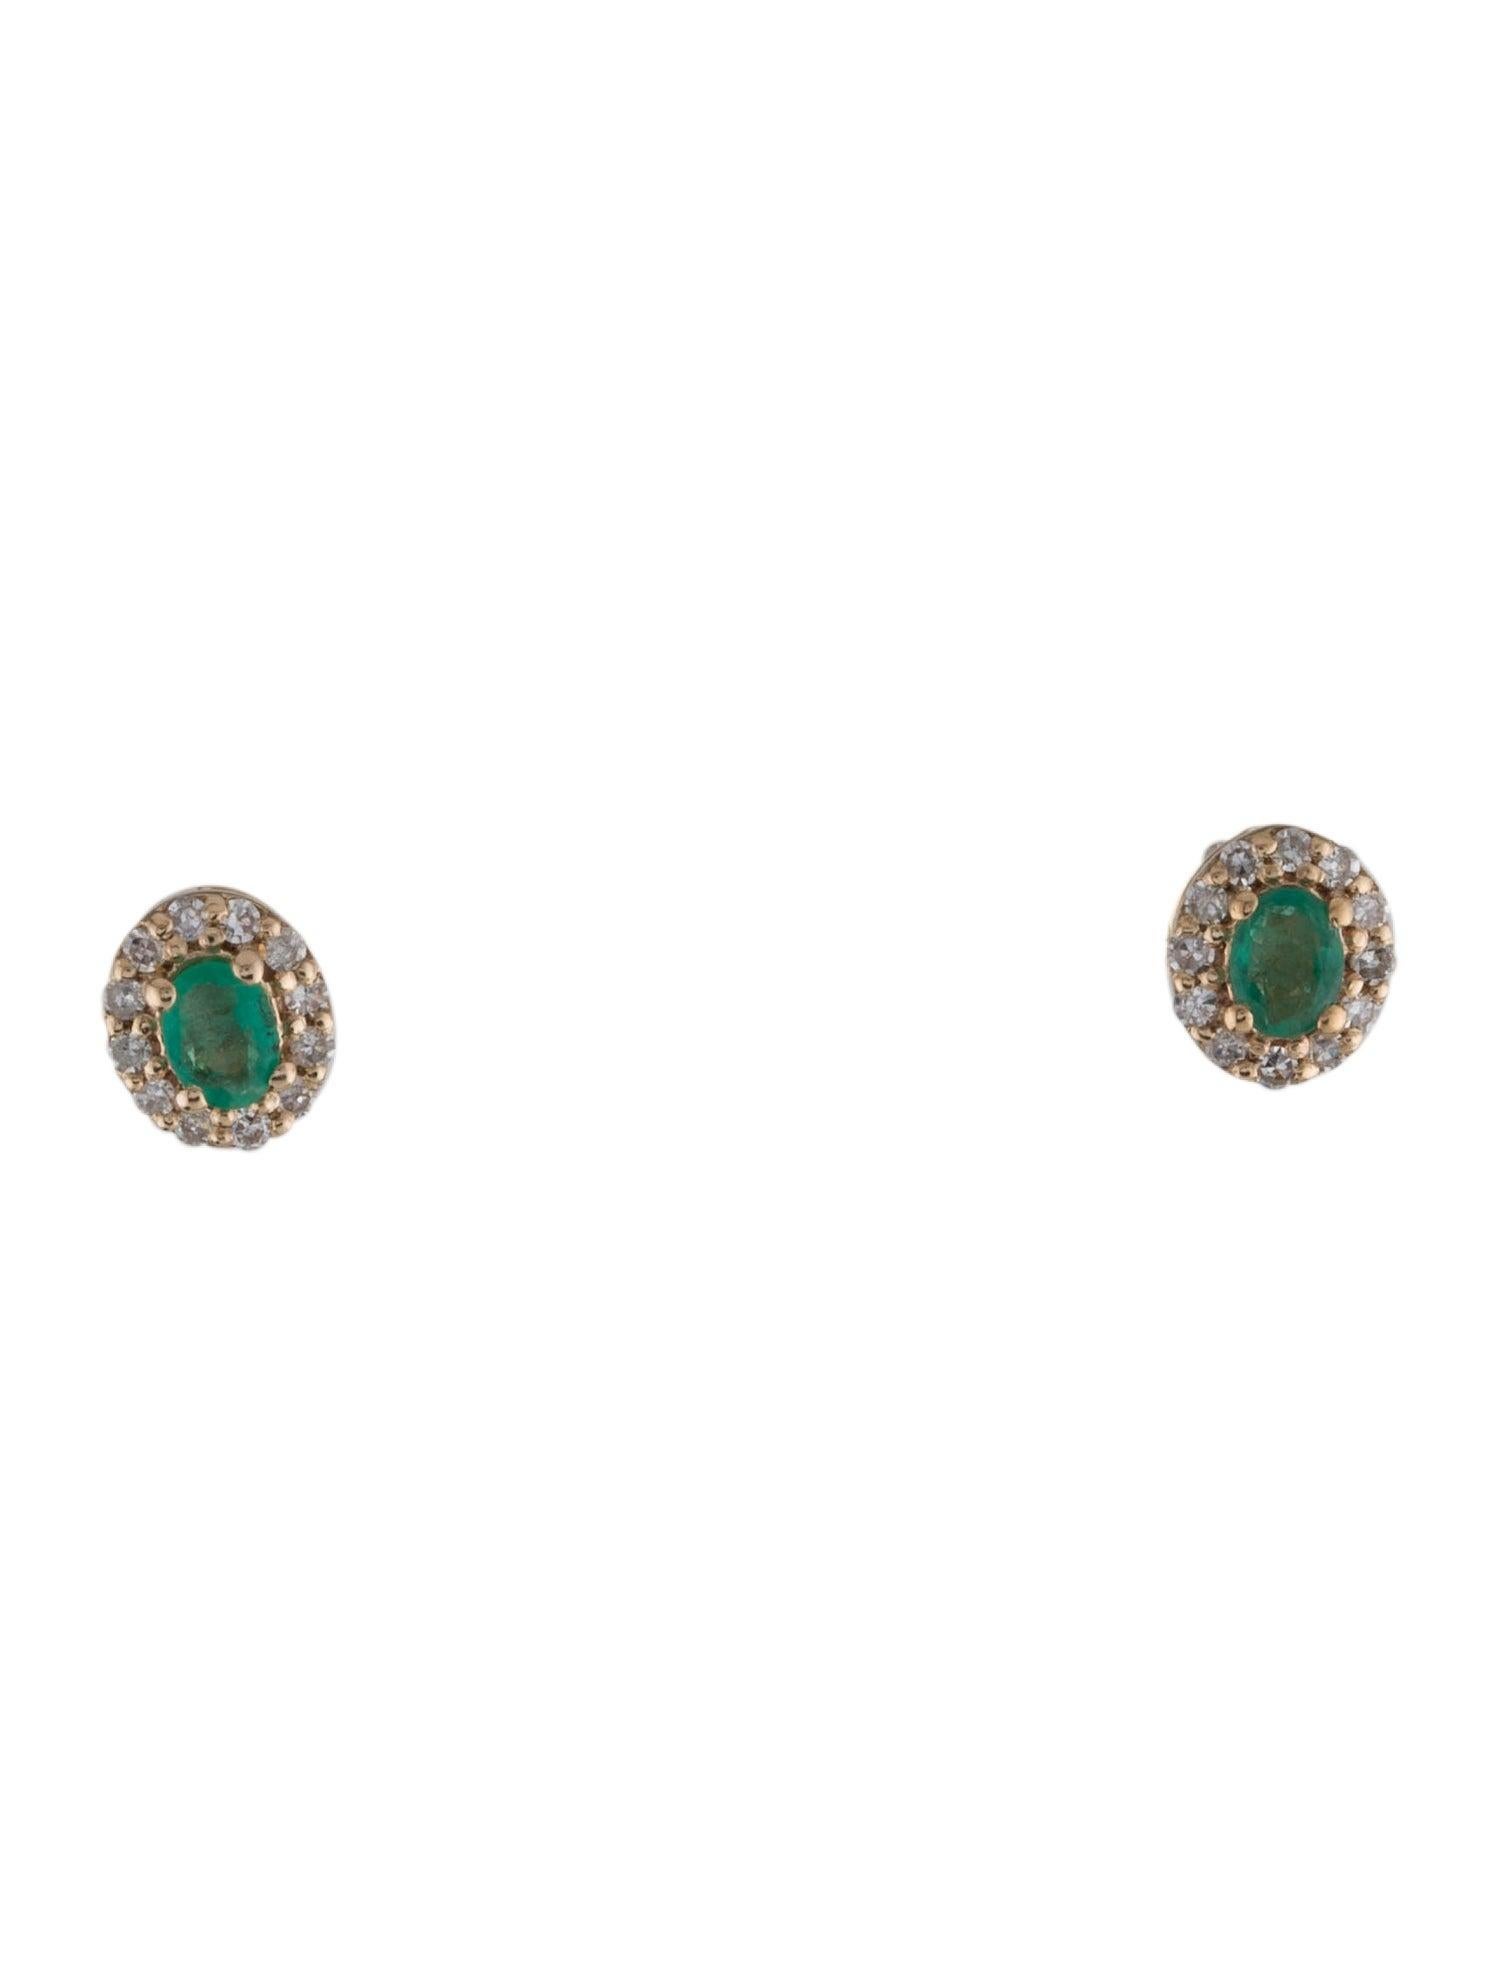 14K Emerald & Diamond Stud Earrings - Exquisite Gemstone Jewelry, Timeless Style In New Condition For Sale In Holtsville, NY